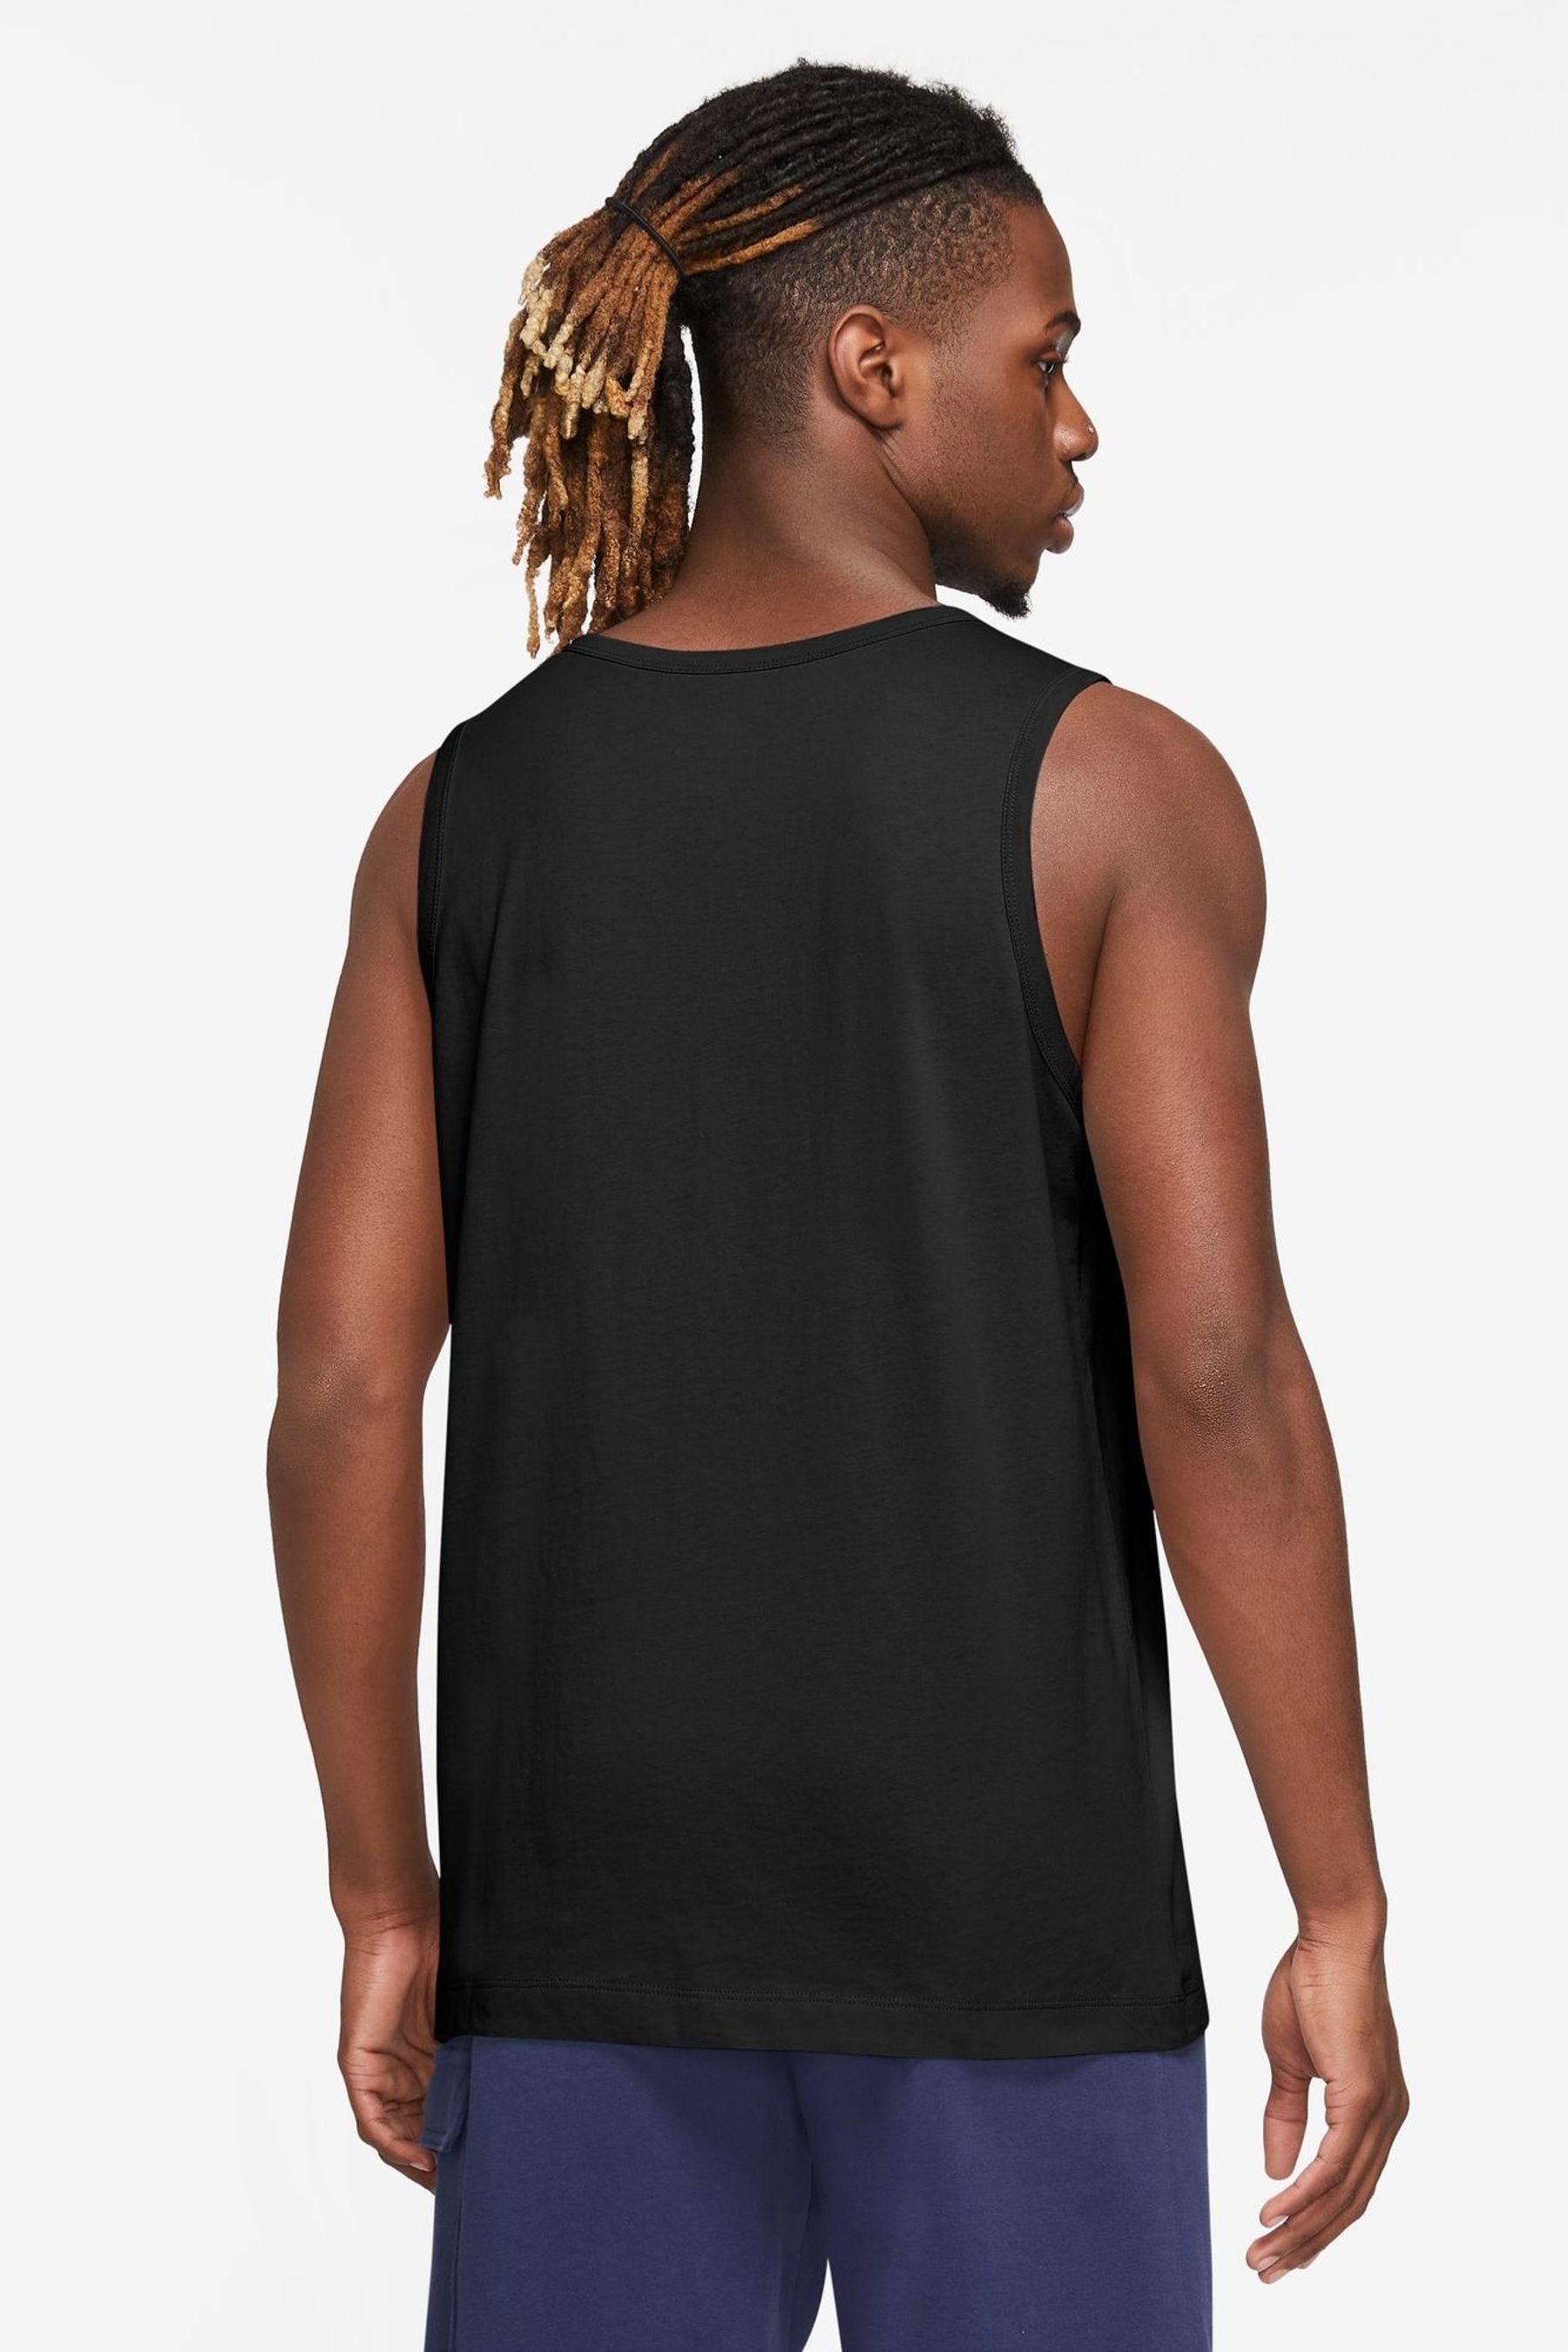 Buy Nike Black Club Vest from the Next UK online shop